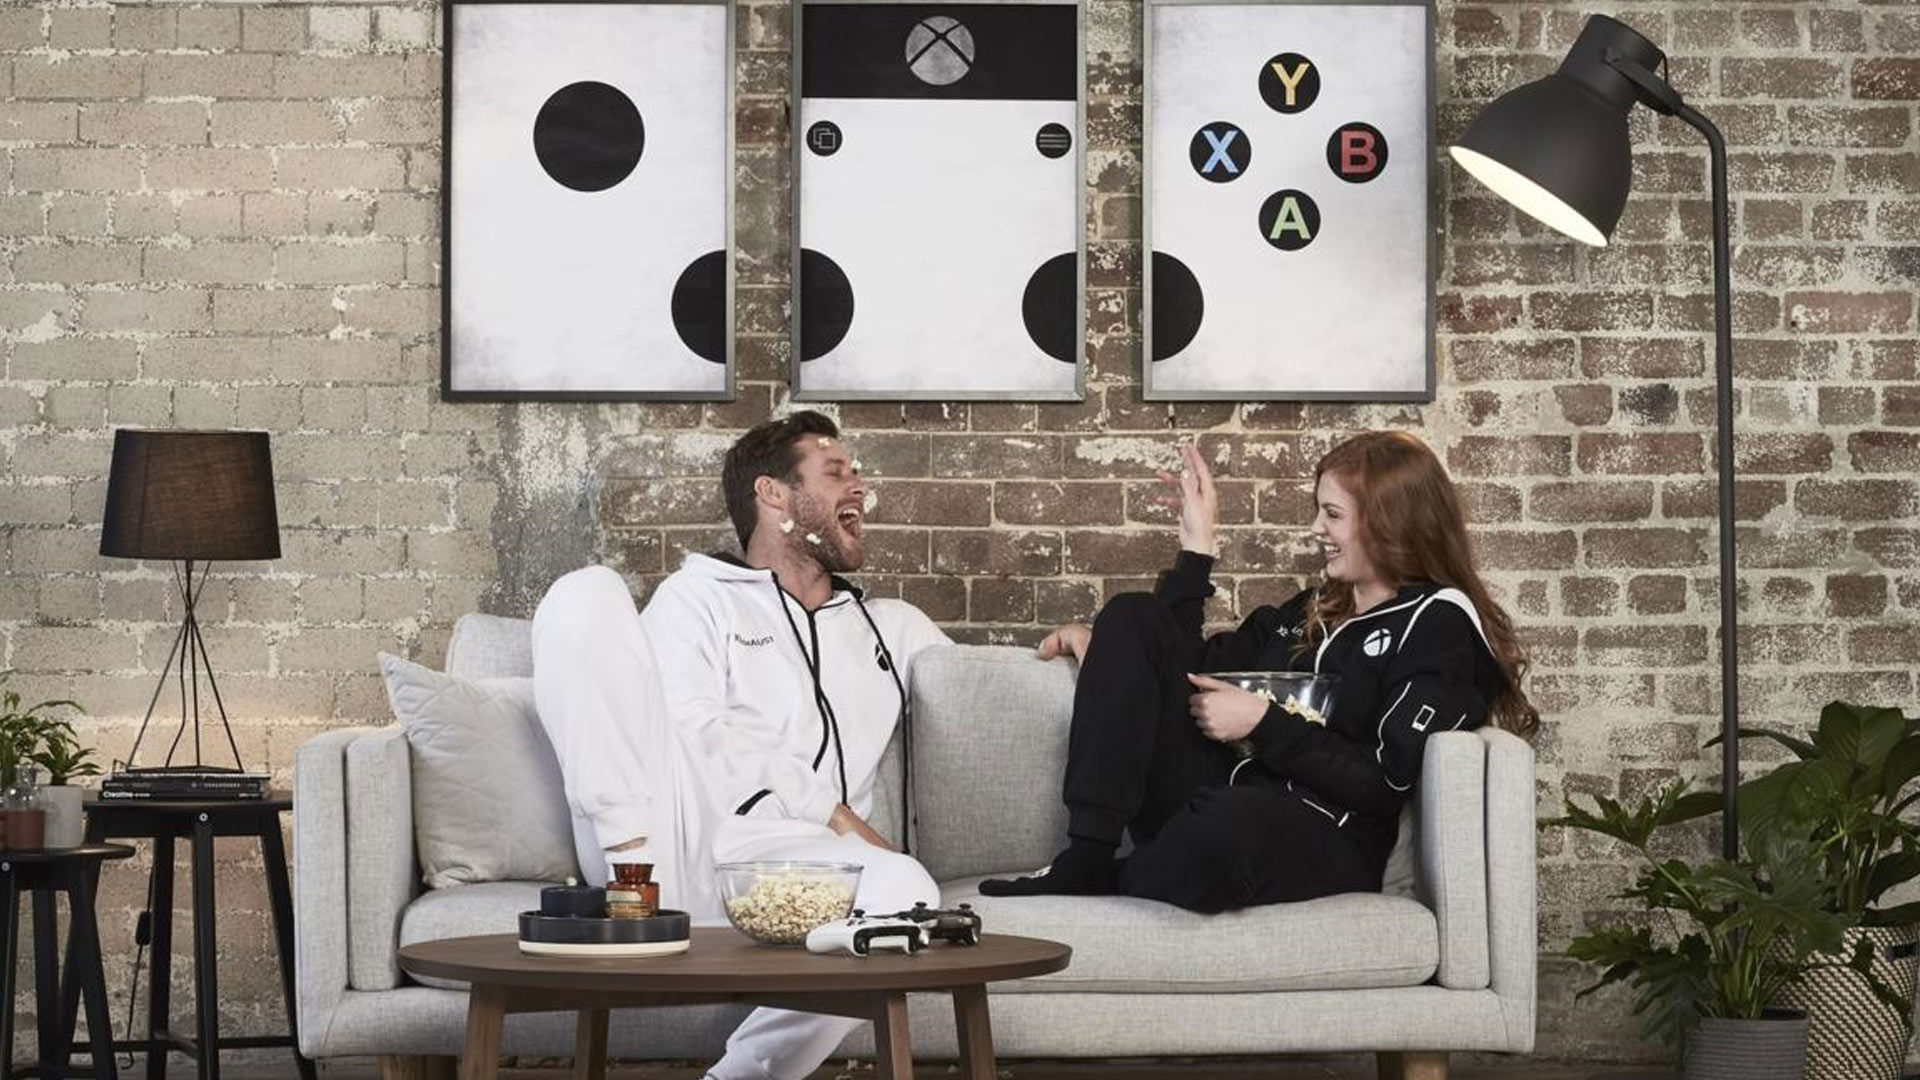 Xbox One Holiday Gift Guide 2016 with the Xbox Onesie